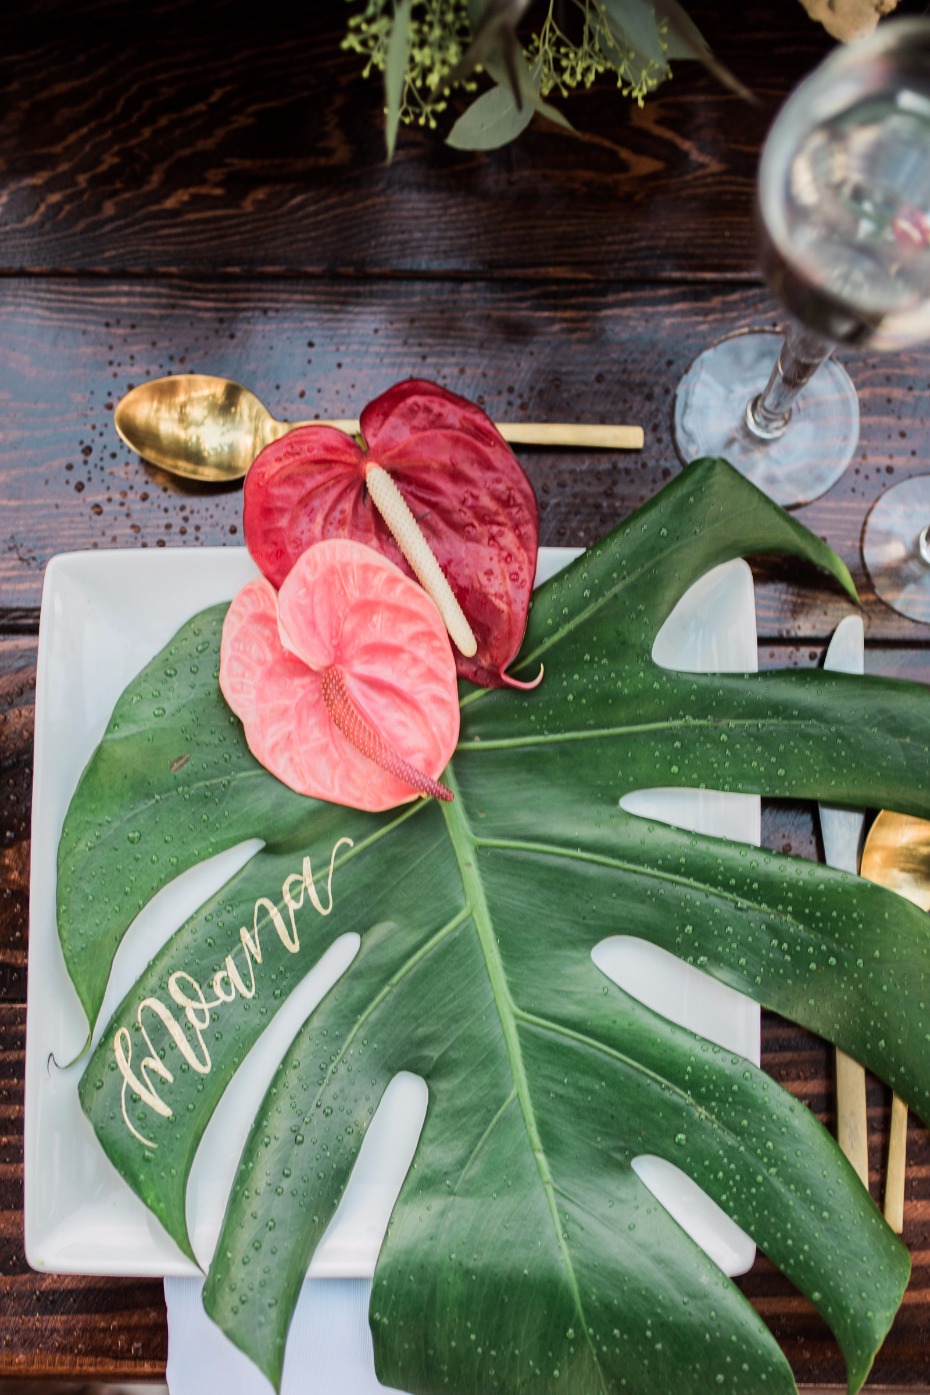 Moana wedding place cards made out of giant tropical leaf